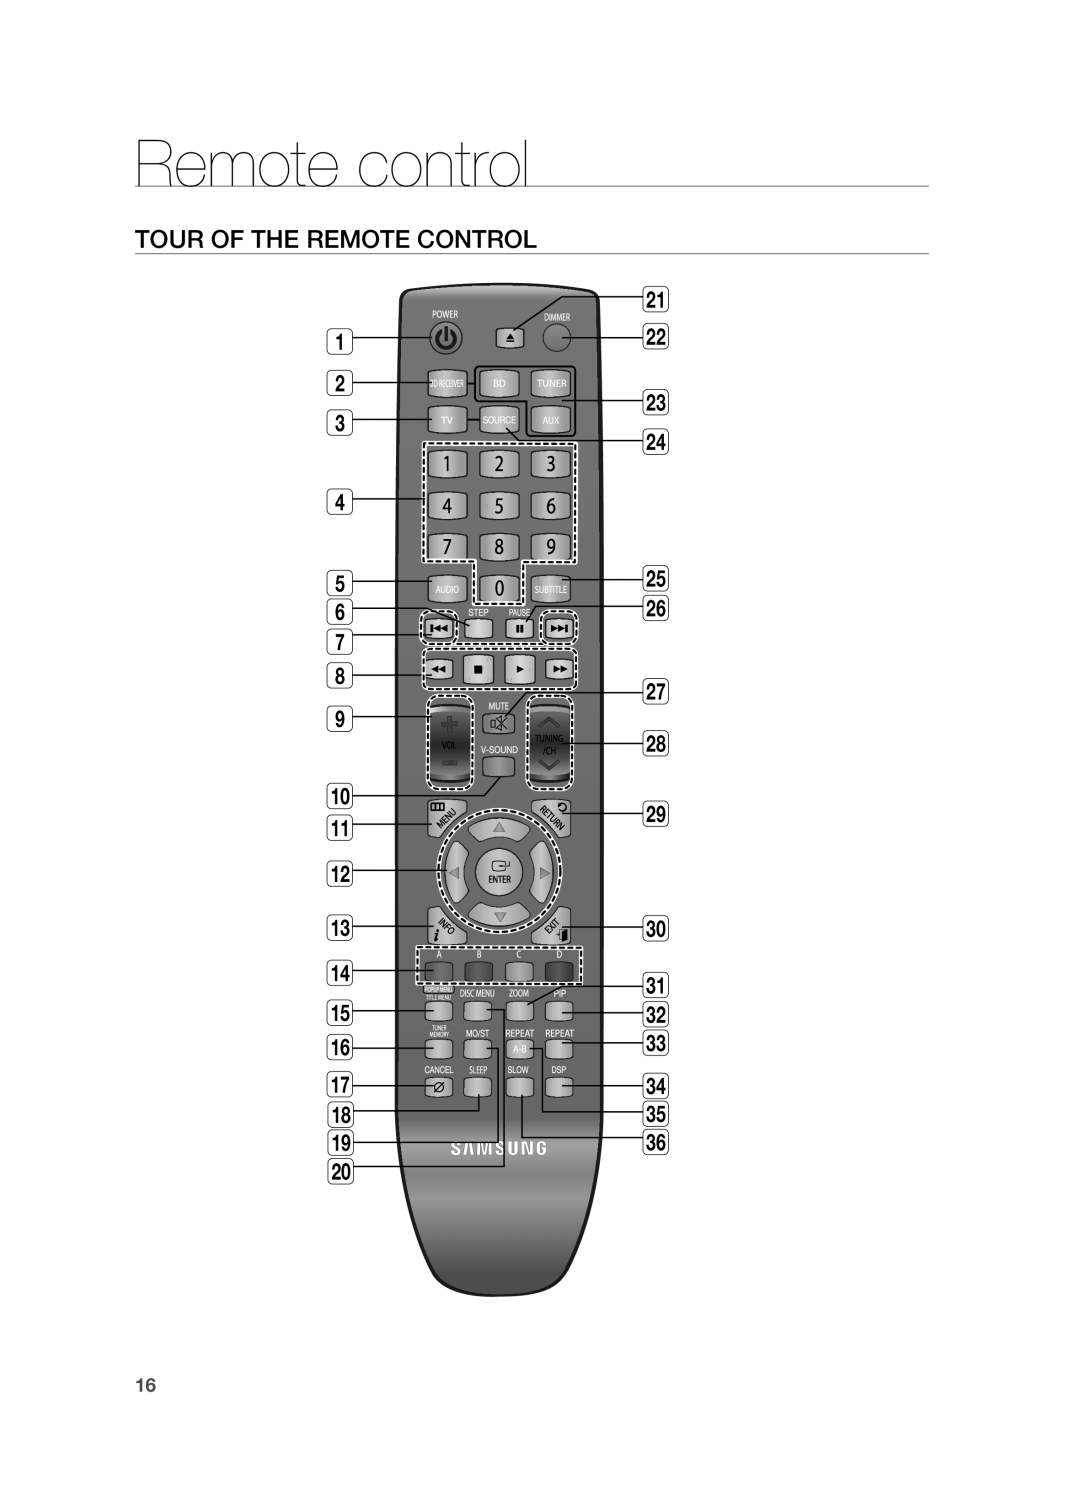 Samsung HT-BD8200 user manual Remote control, Tour Of The Remote Control, 1 2 3 4 5 6 7 8 9 10 11 12 13 14 15 16 17 18 19 